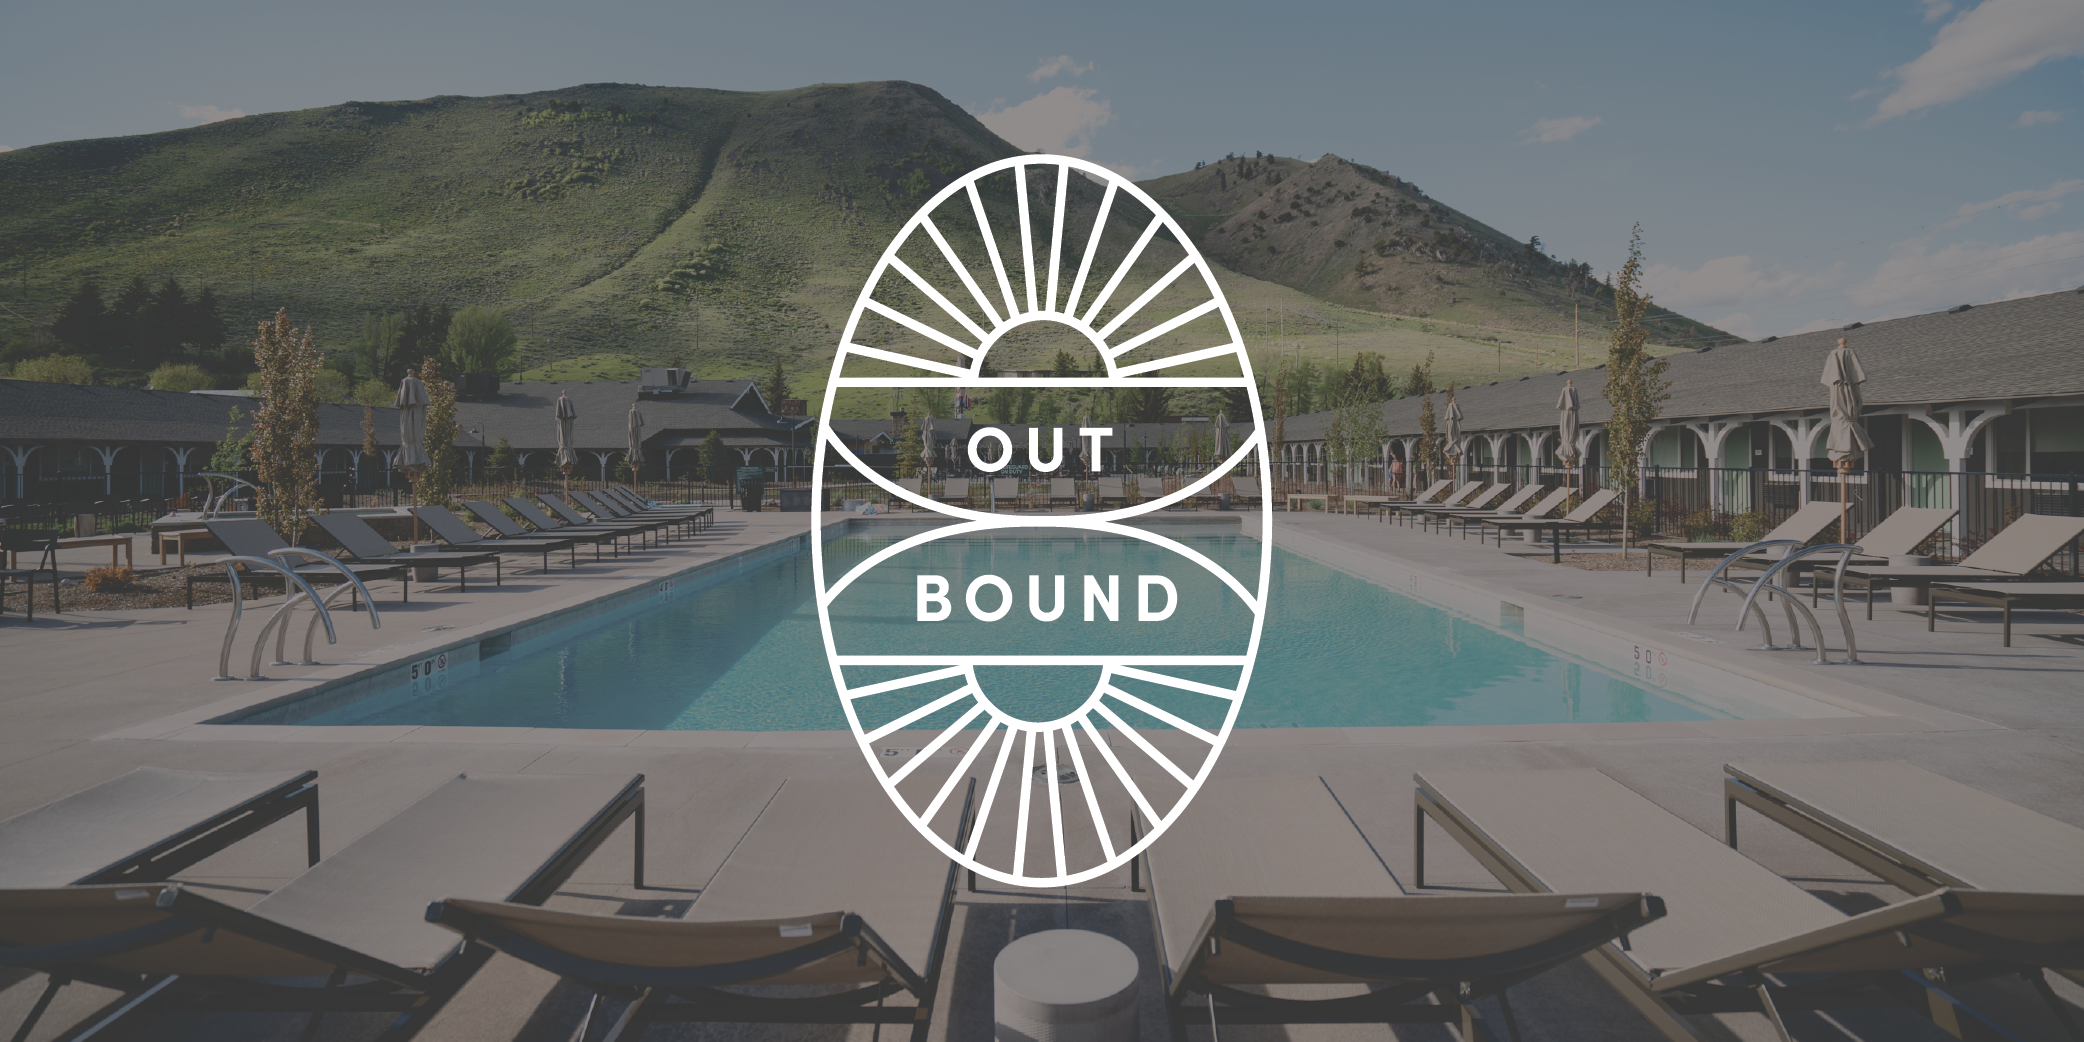 Outbound logo in front of a swimming pool and mountains